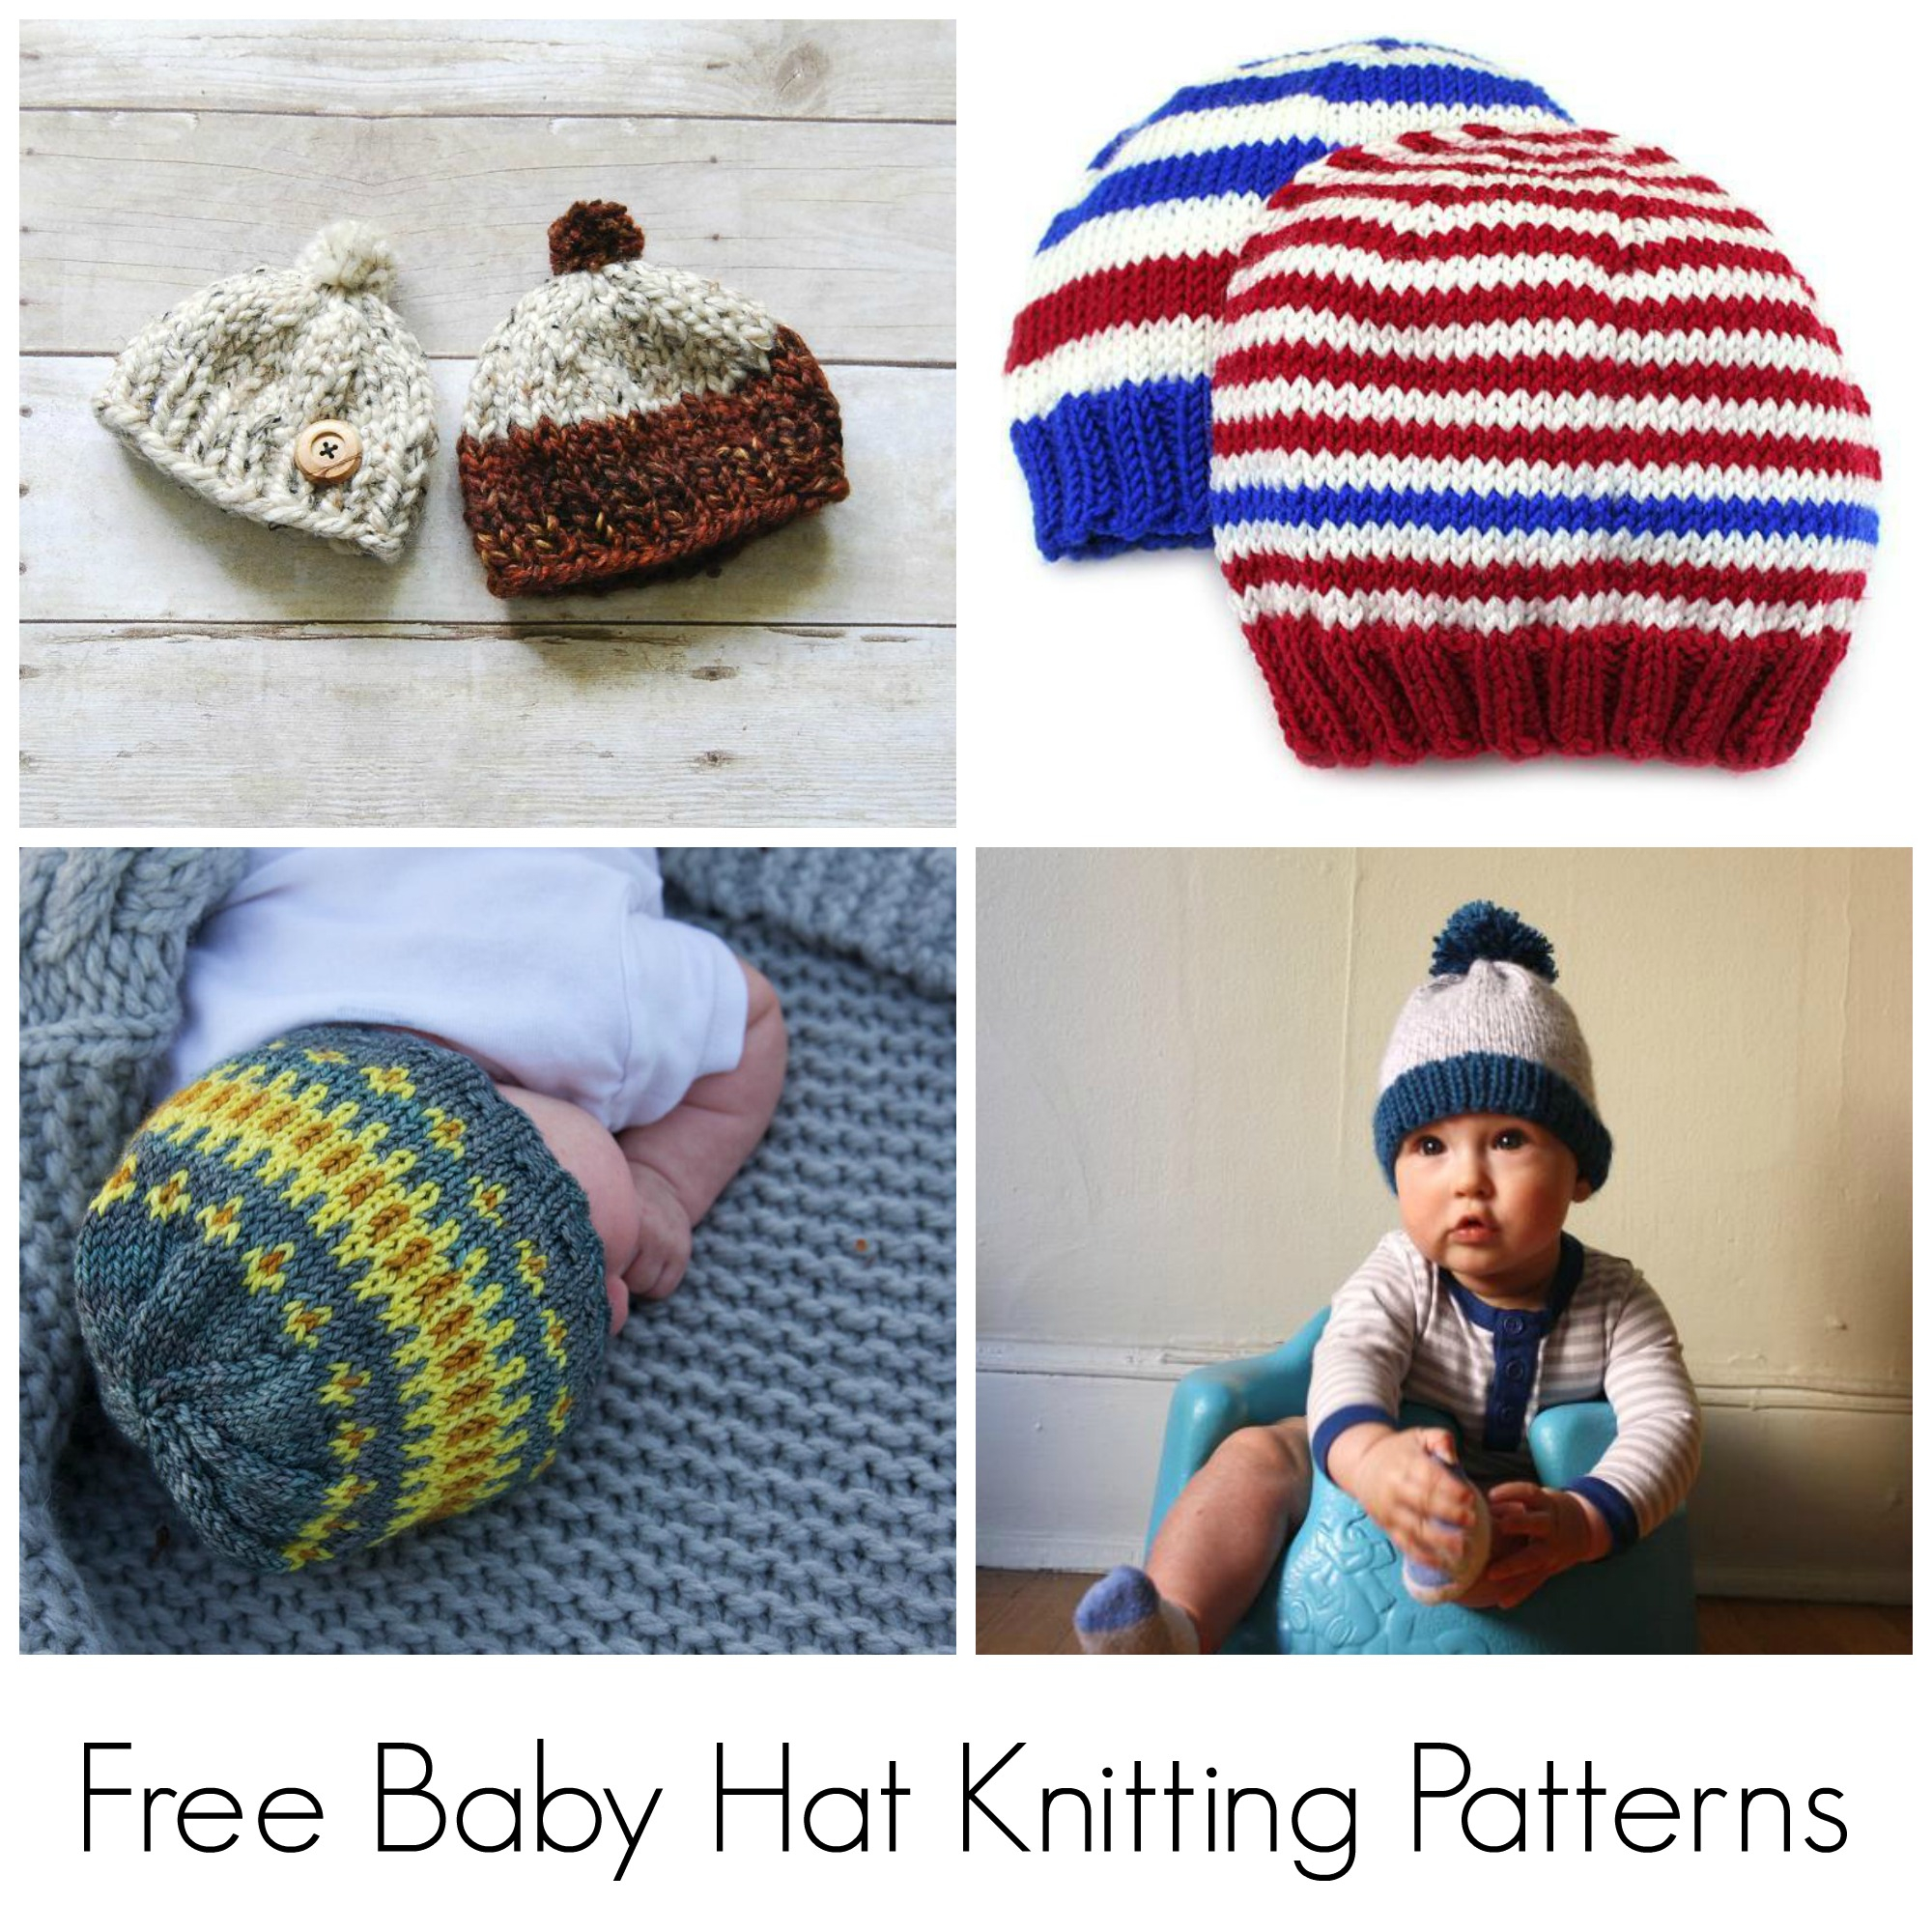 Free Baby Knitting Patterns 8 Ply 10 Free Knitting Patterns For Ba Hats On Craftsy